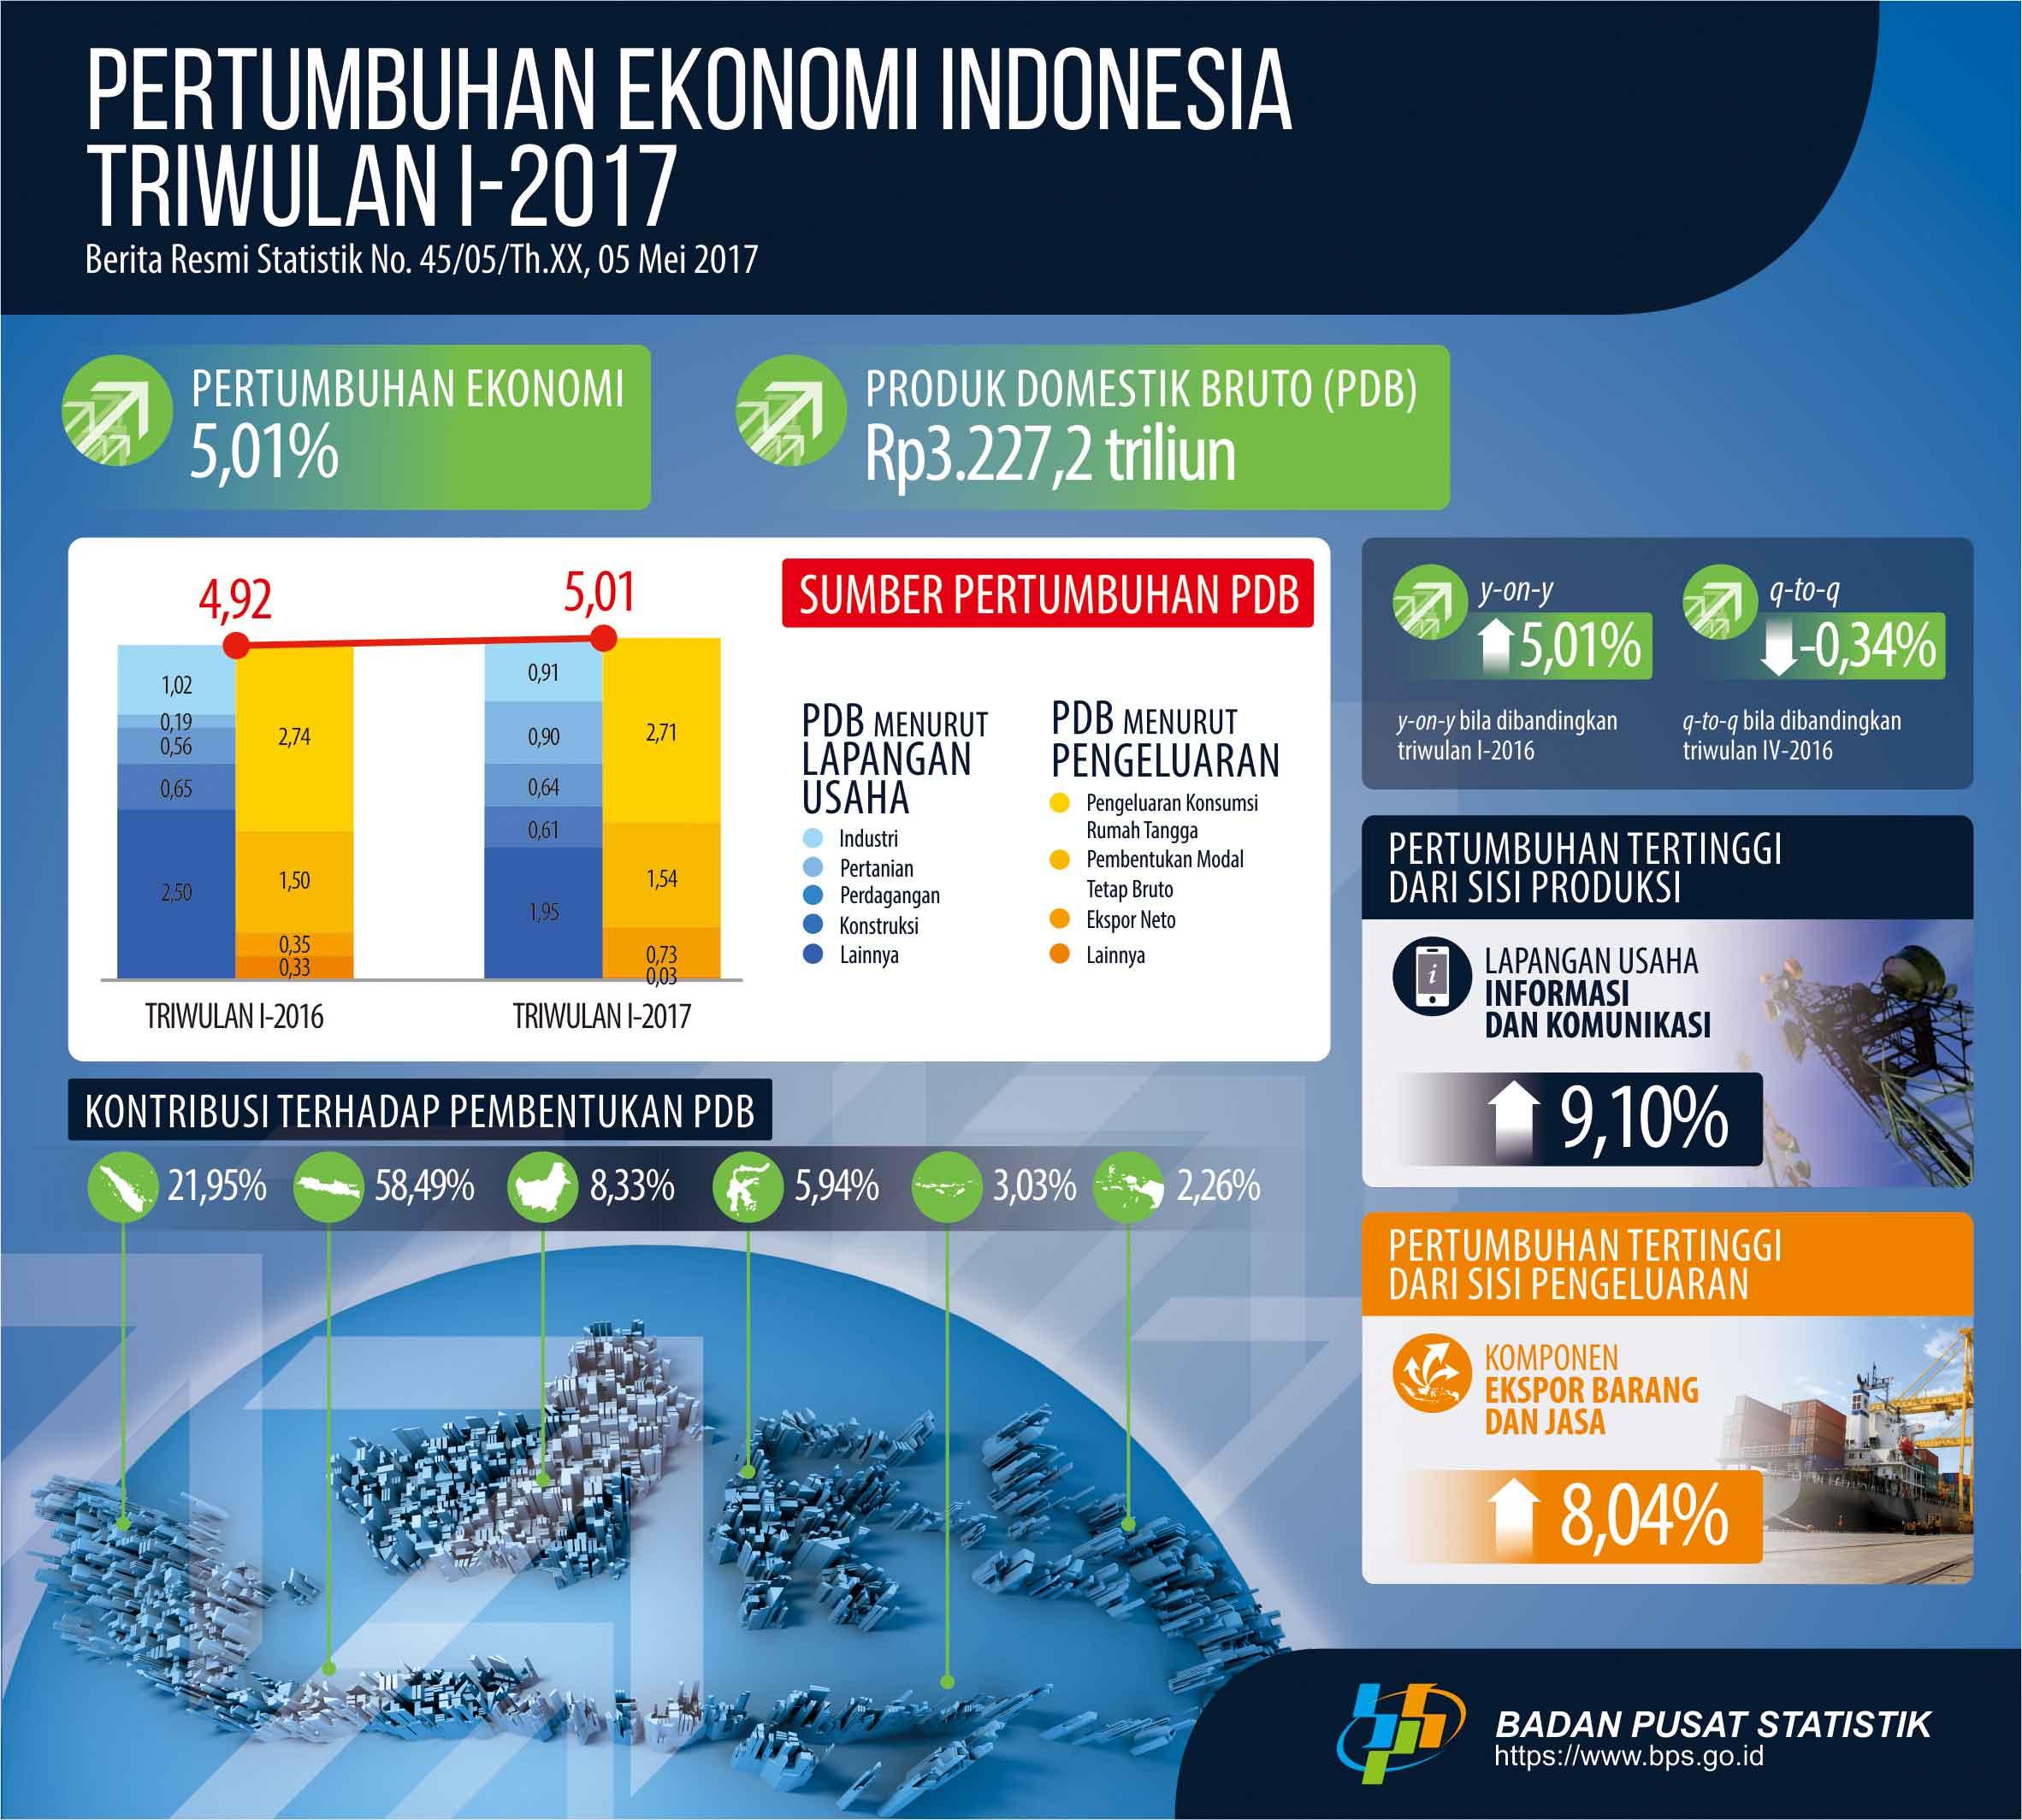 Economic Growth of Indonesia First Quarter 2017